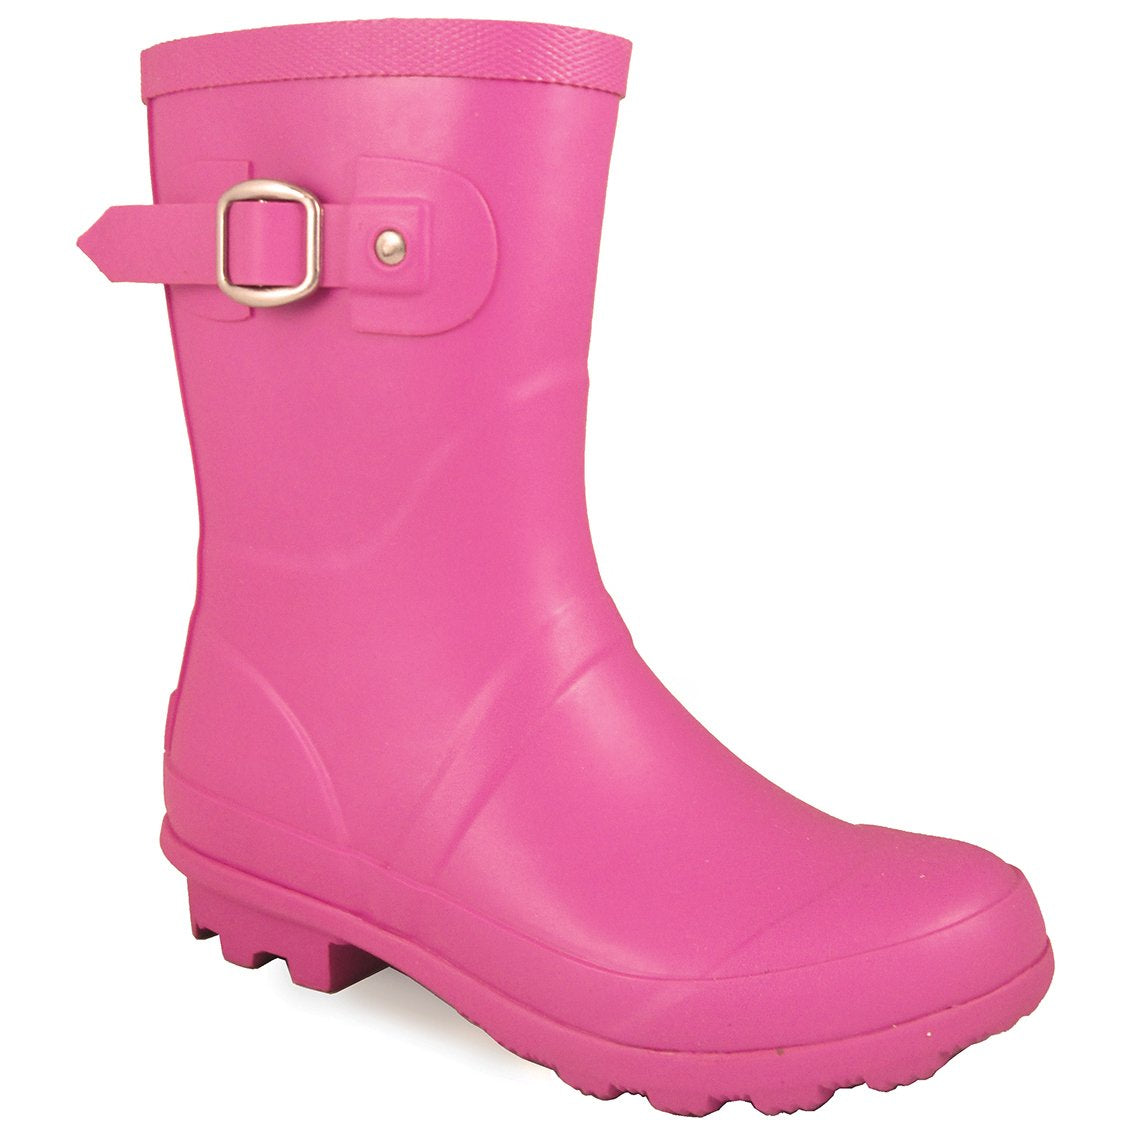 Smoky Mountain Girl's Children's Pink Rubber Boot